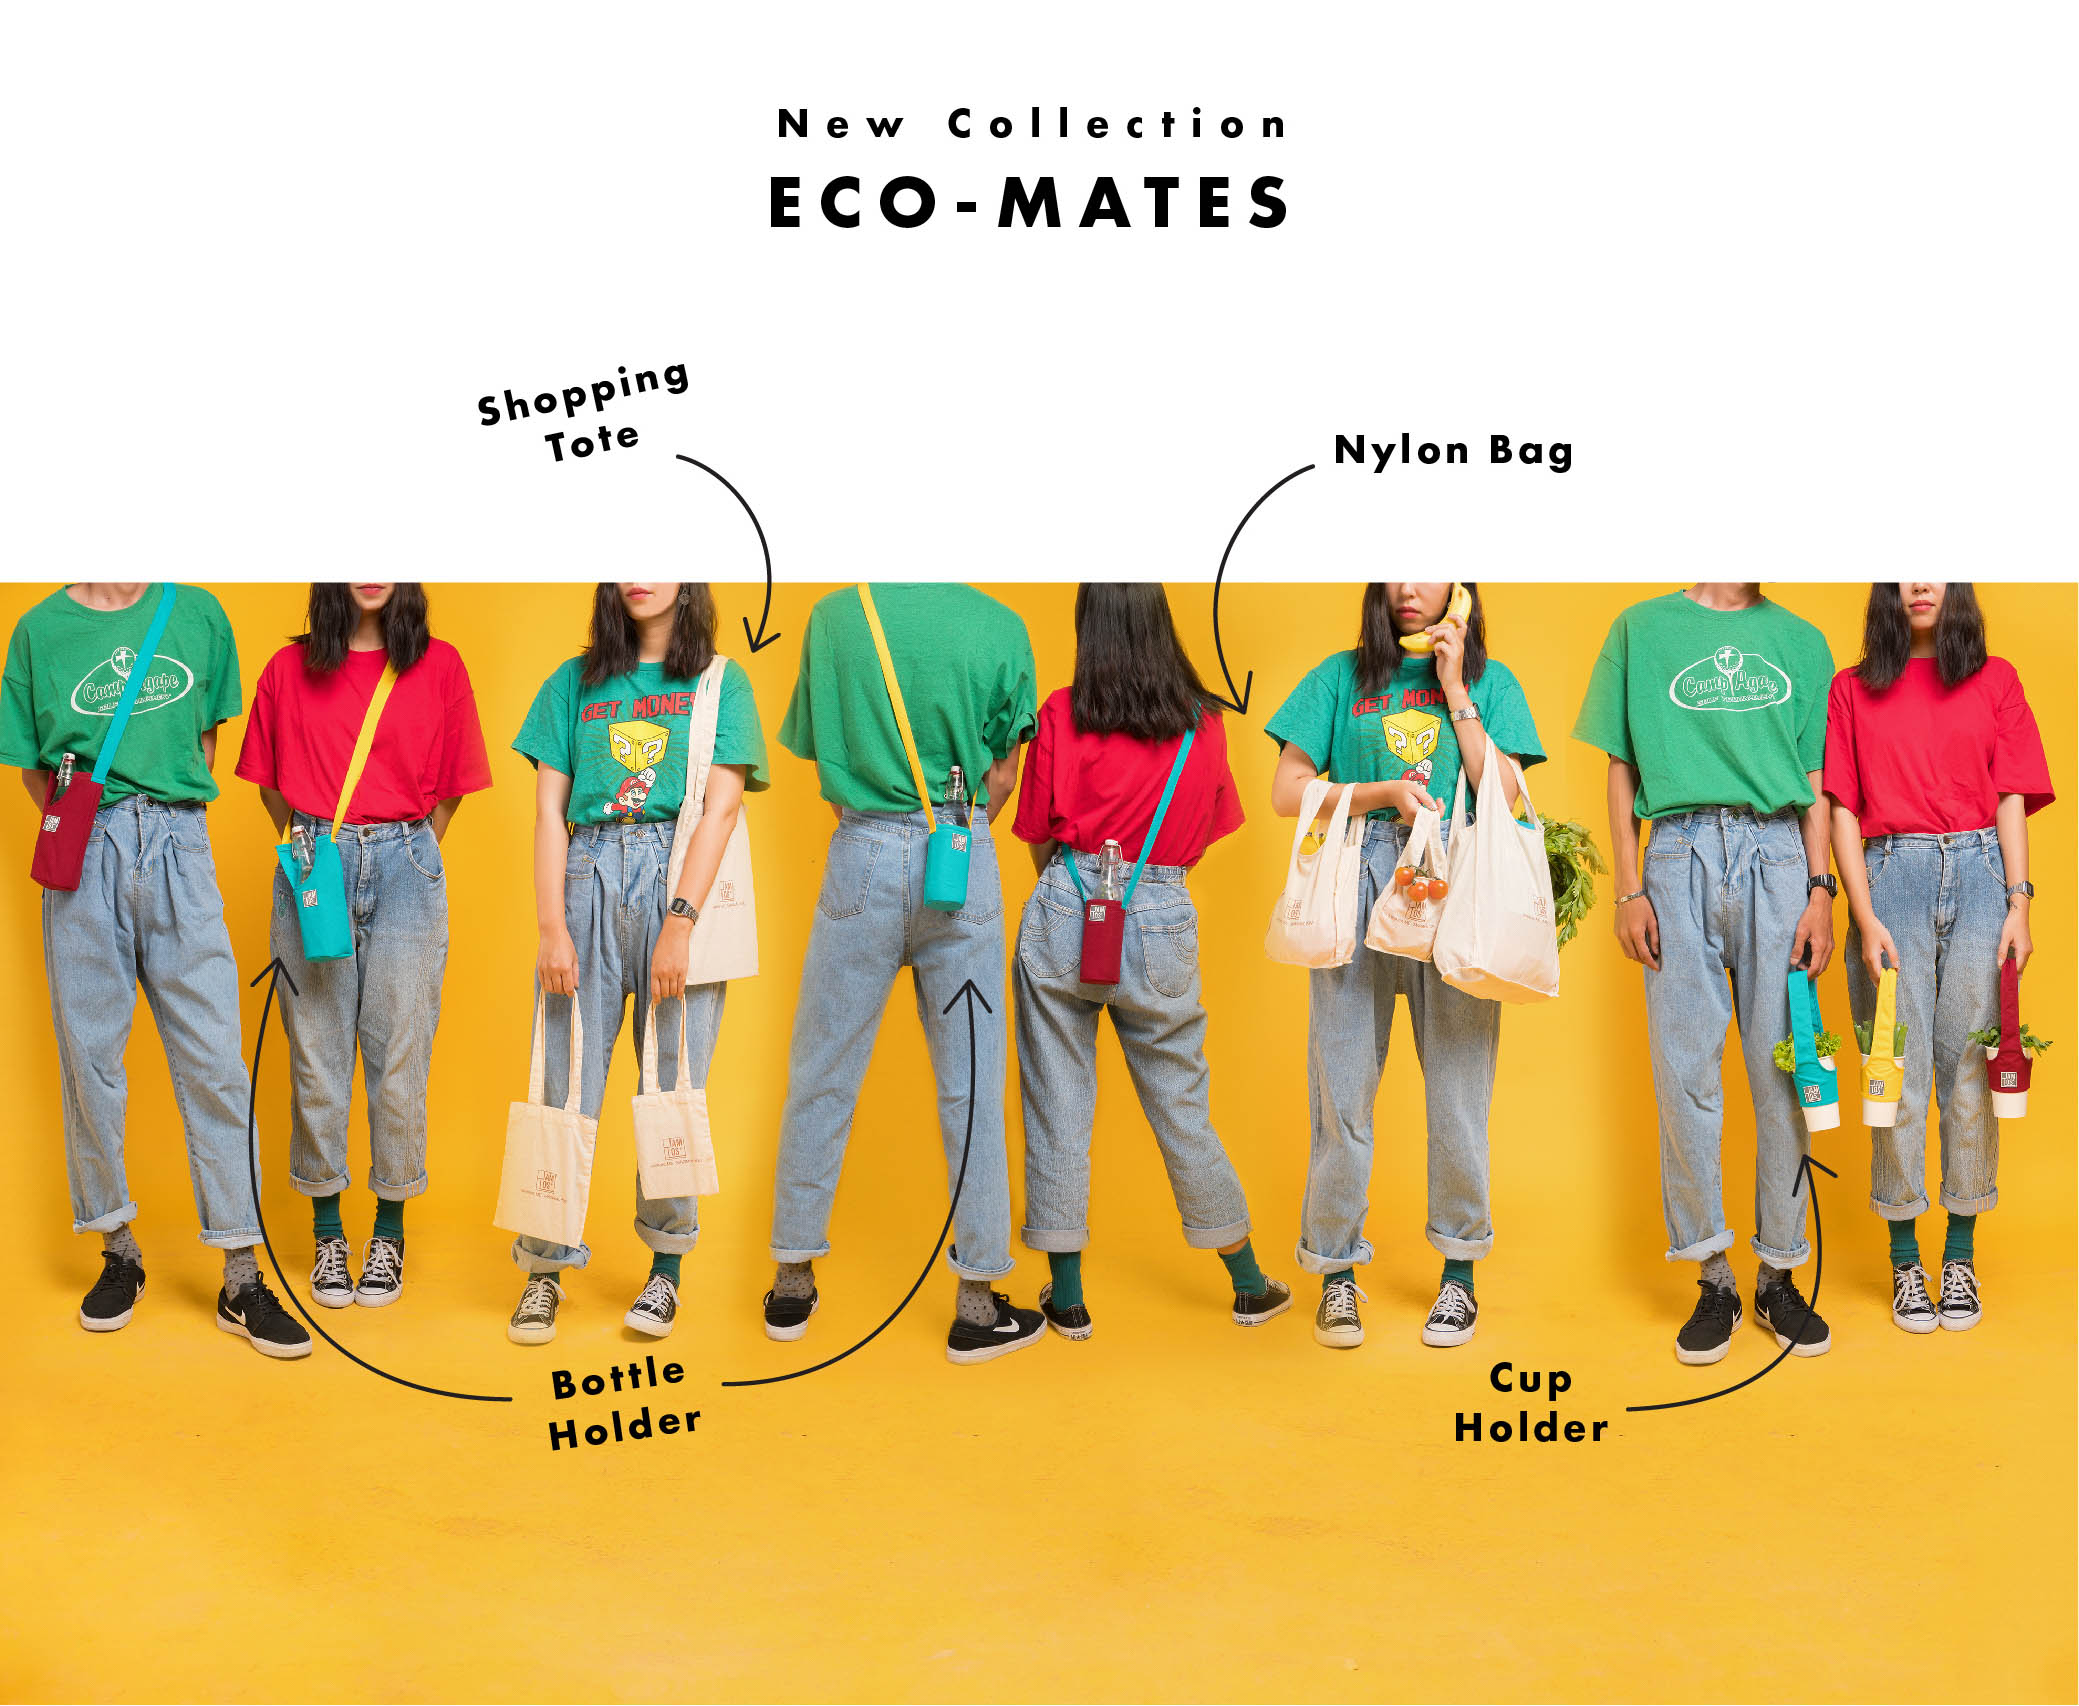 The Eco Mates collection brings customers fashionable, environmentally friendly shopping bags and cup holders made from canvas – a call to reduce single-use plastic.